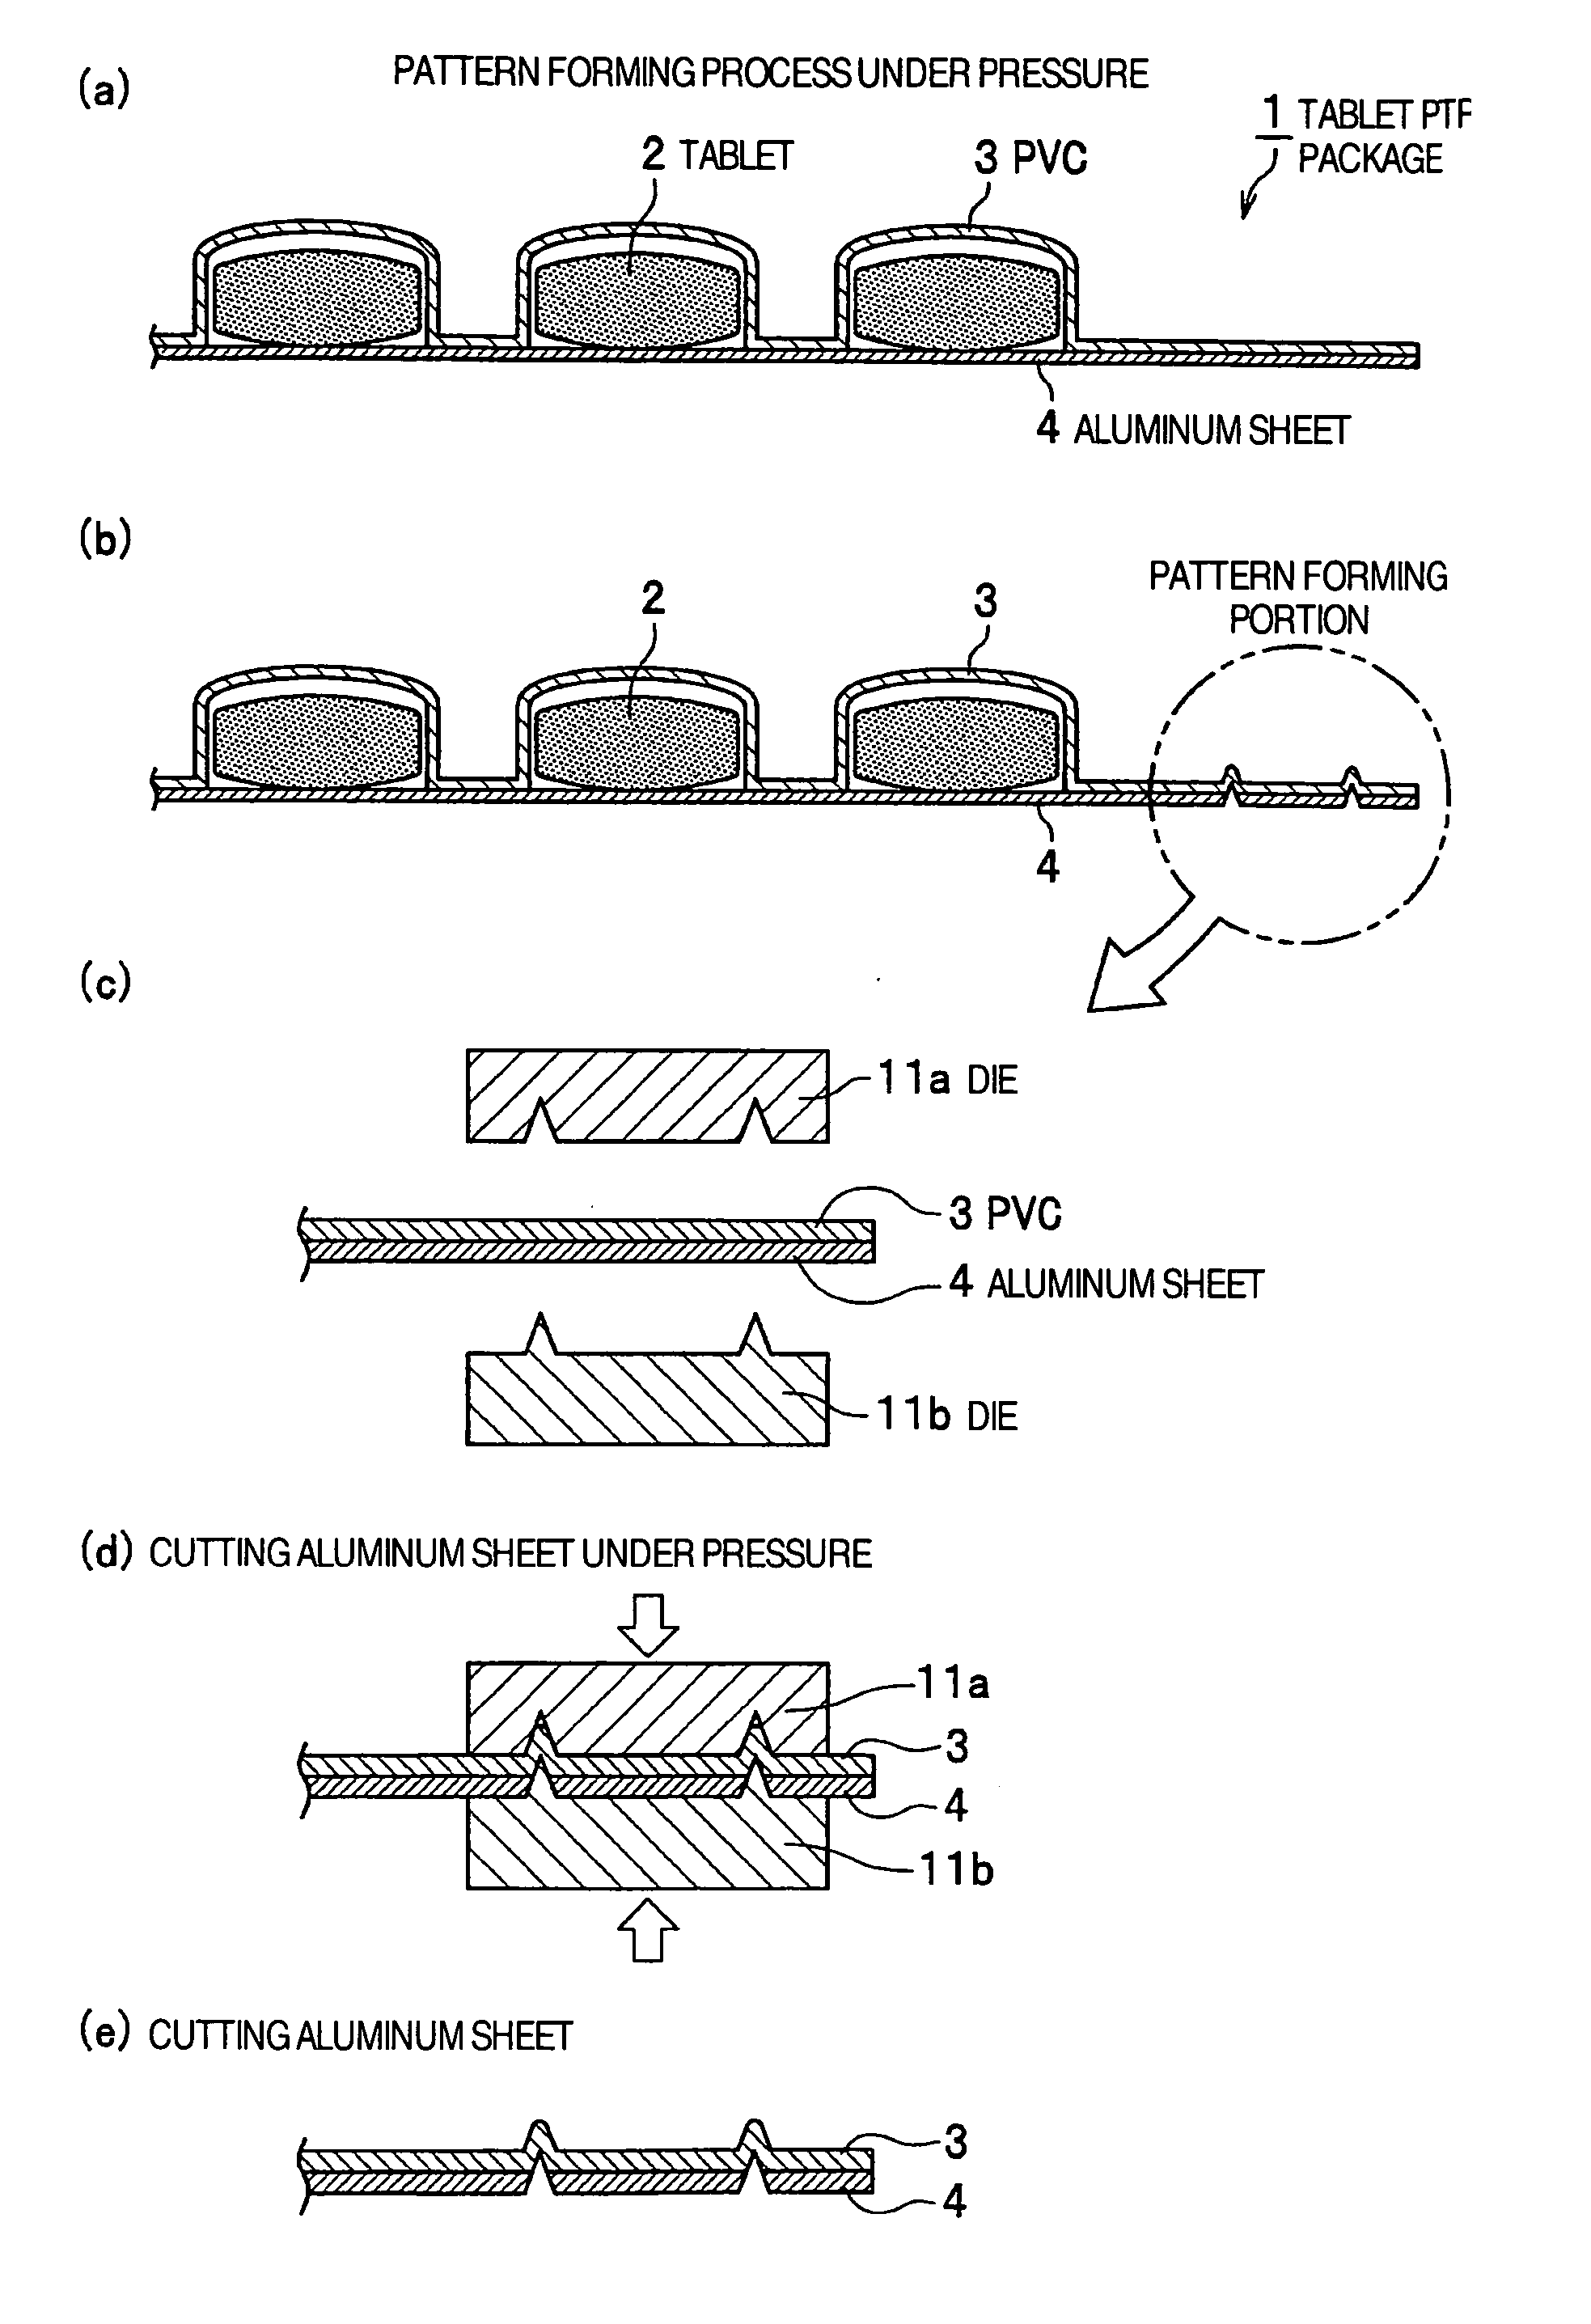 Radio frequency identification tag and manufacturing method thereof